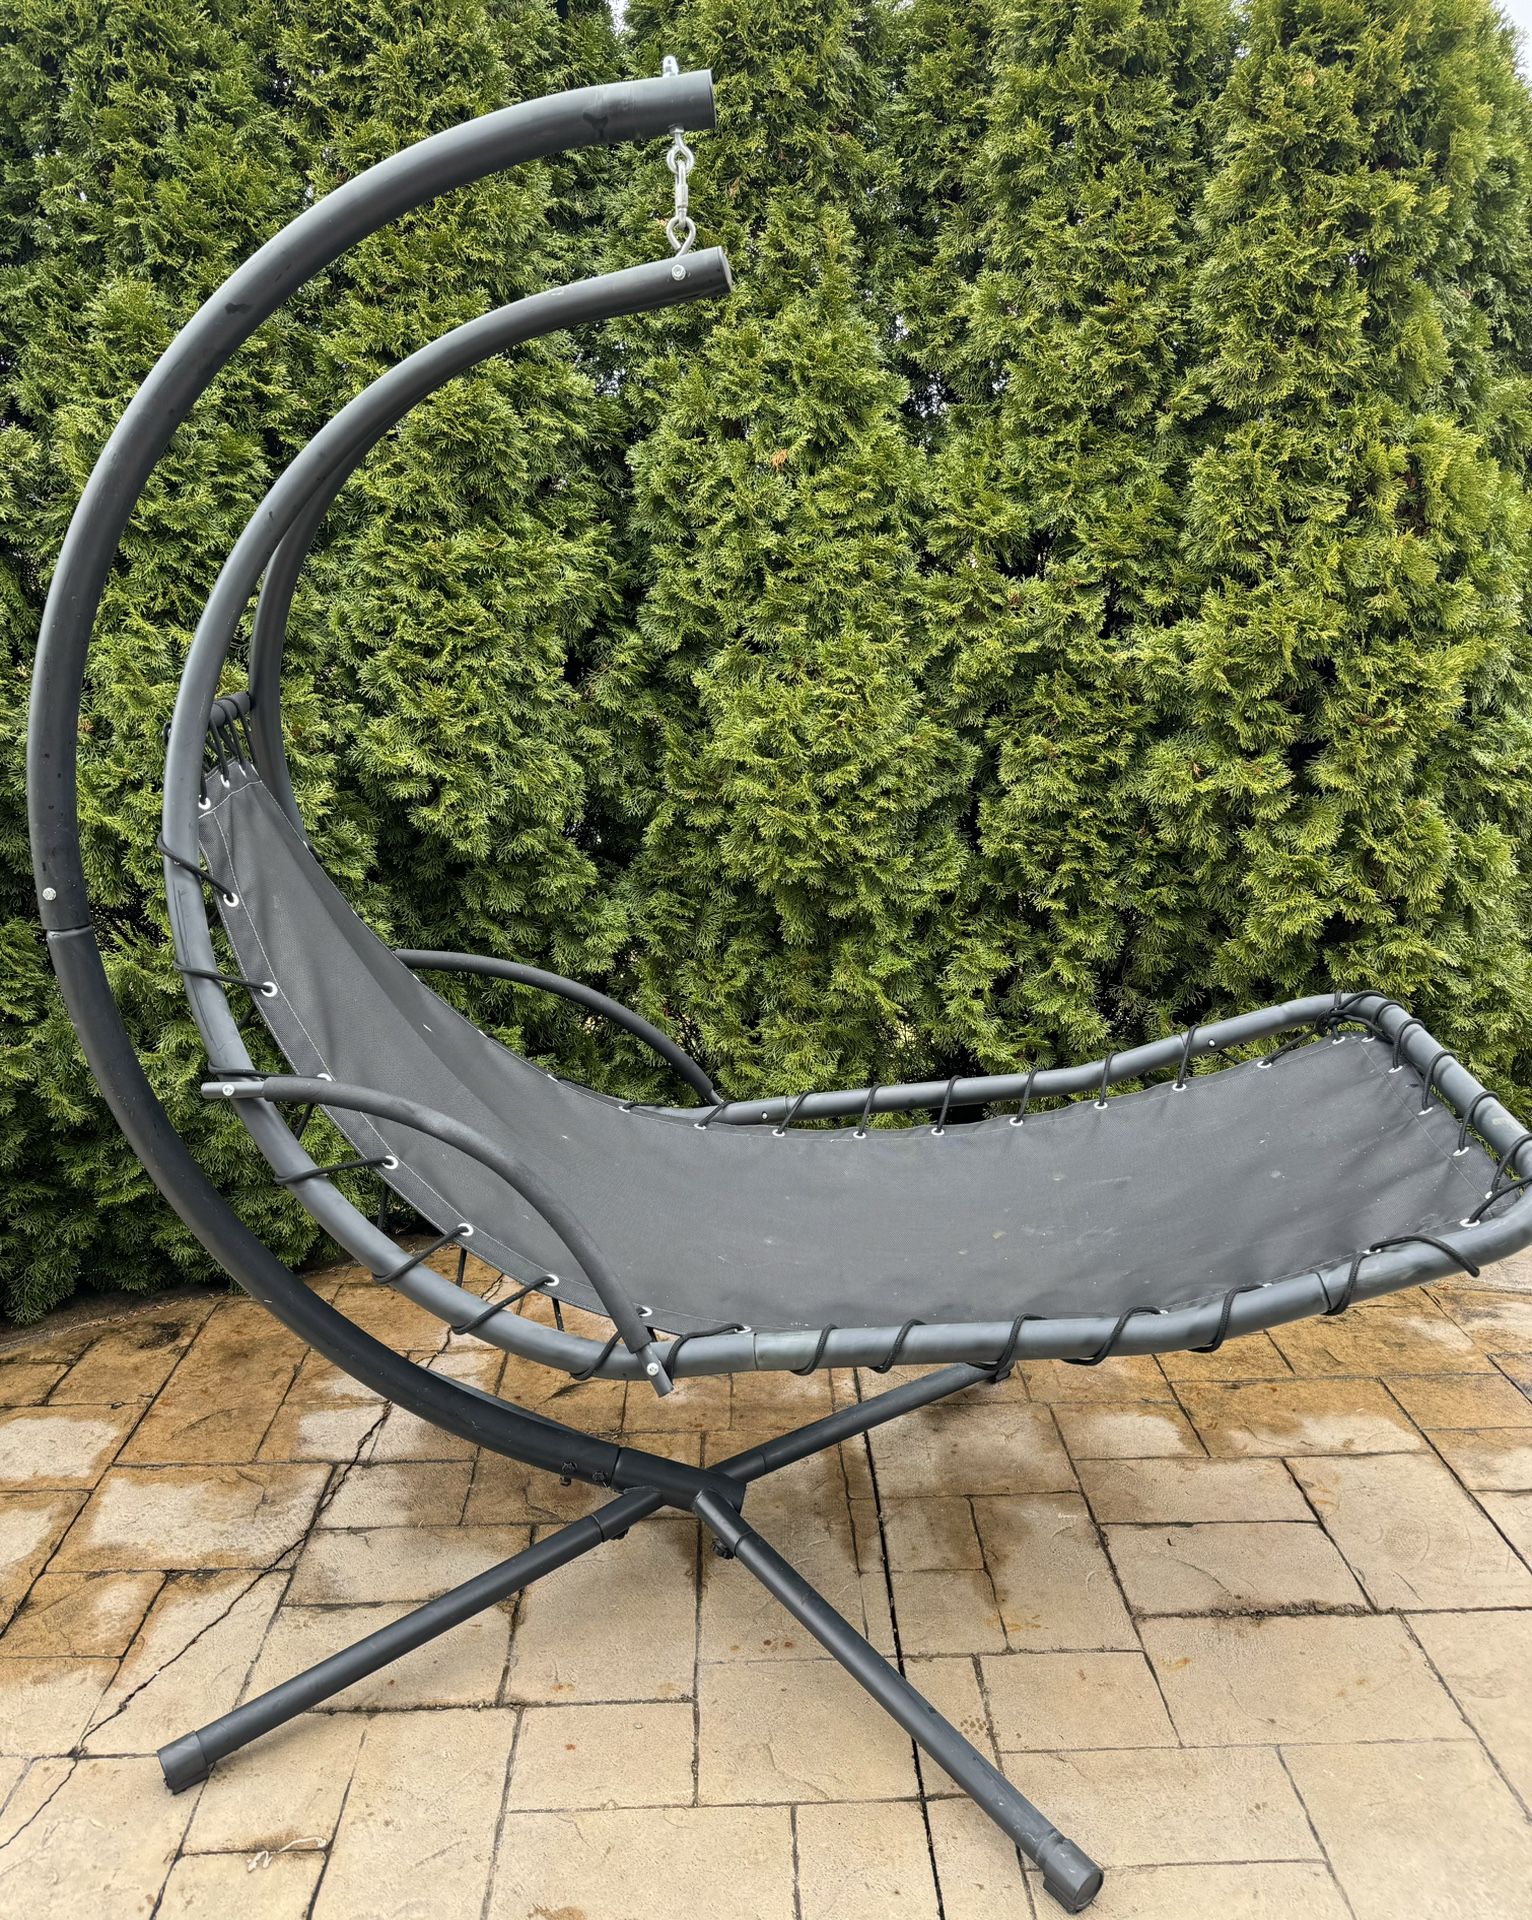 Hanging Lounge Chair Hammock - Outdoor Patio Furniture 